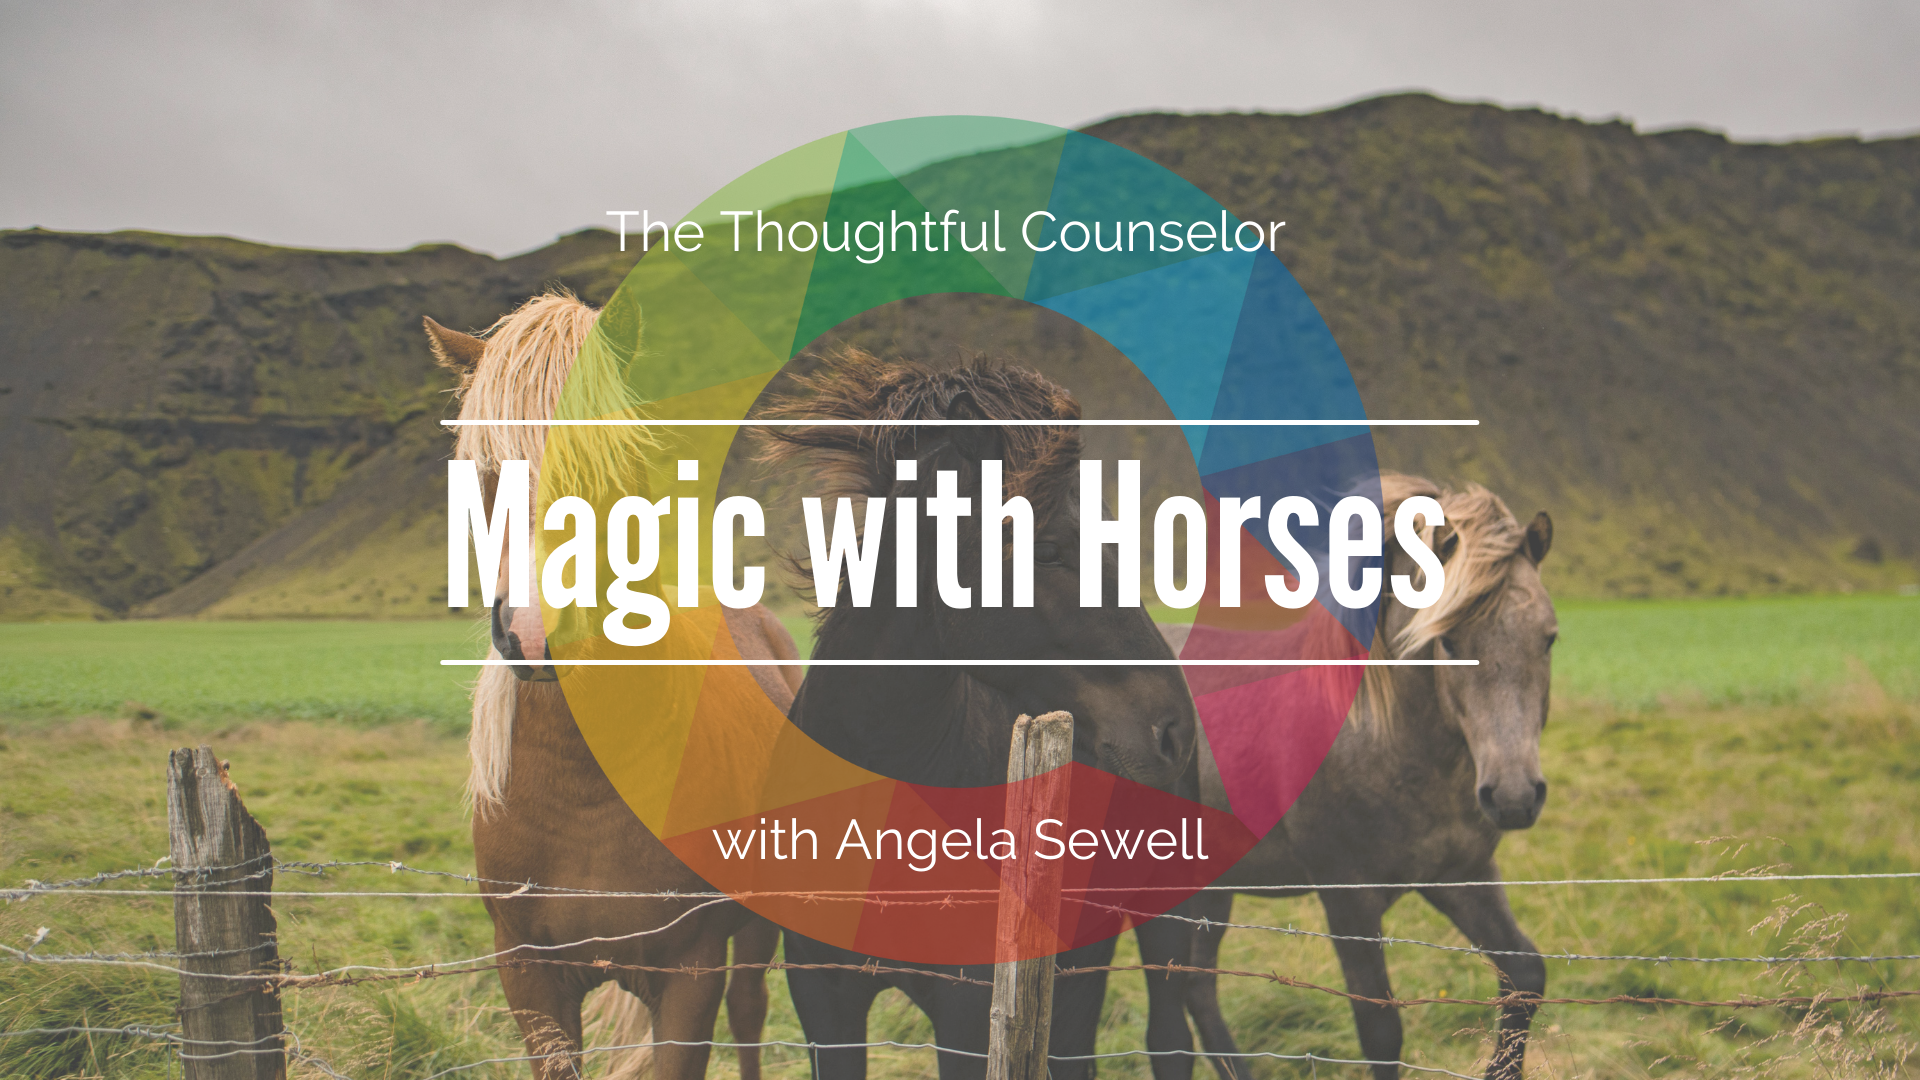 Magic with Horses—Equine Therapy with Angela Sewell